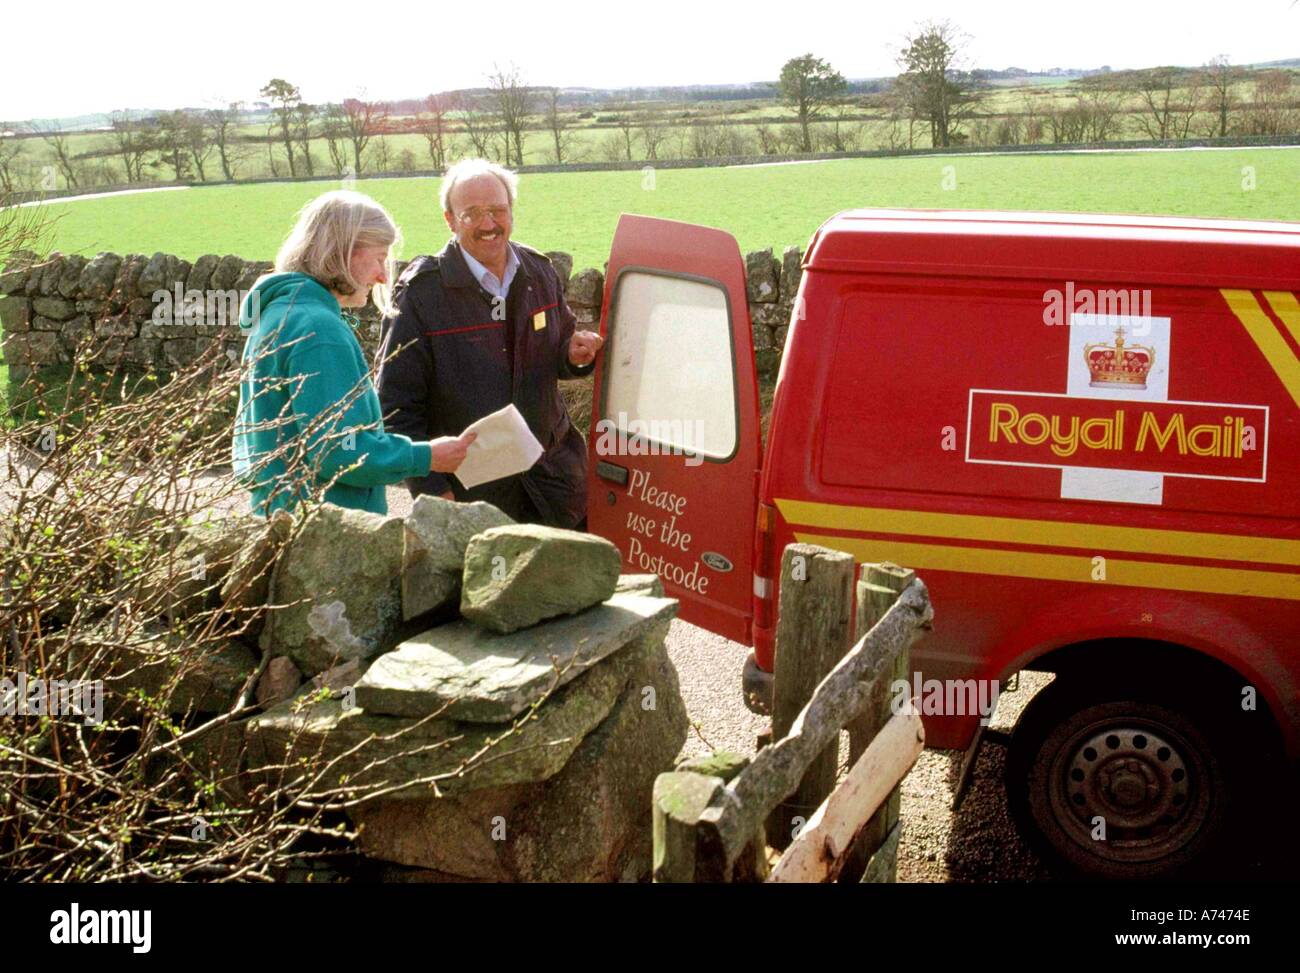 Post office van delivering post to someone in the countryside Stock Photo